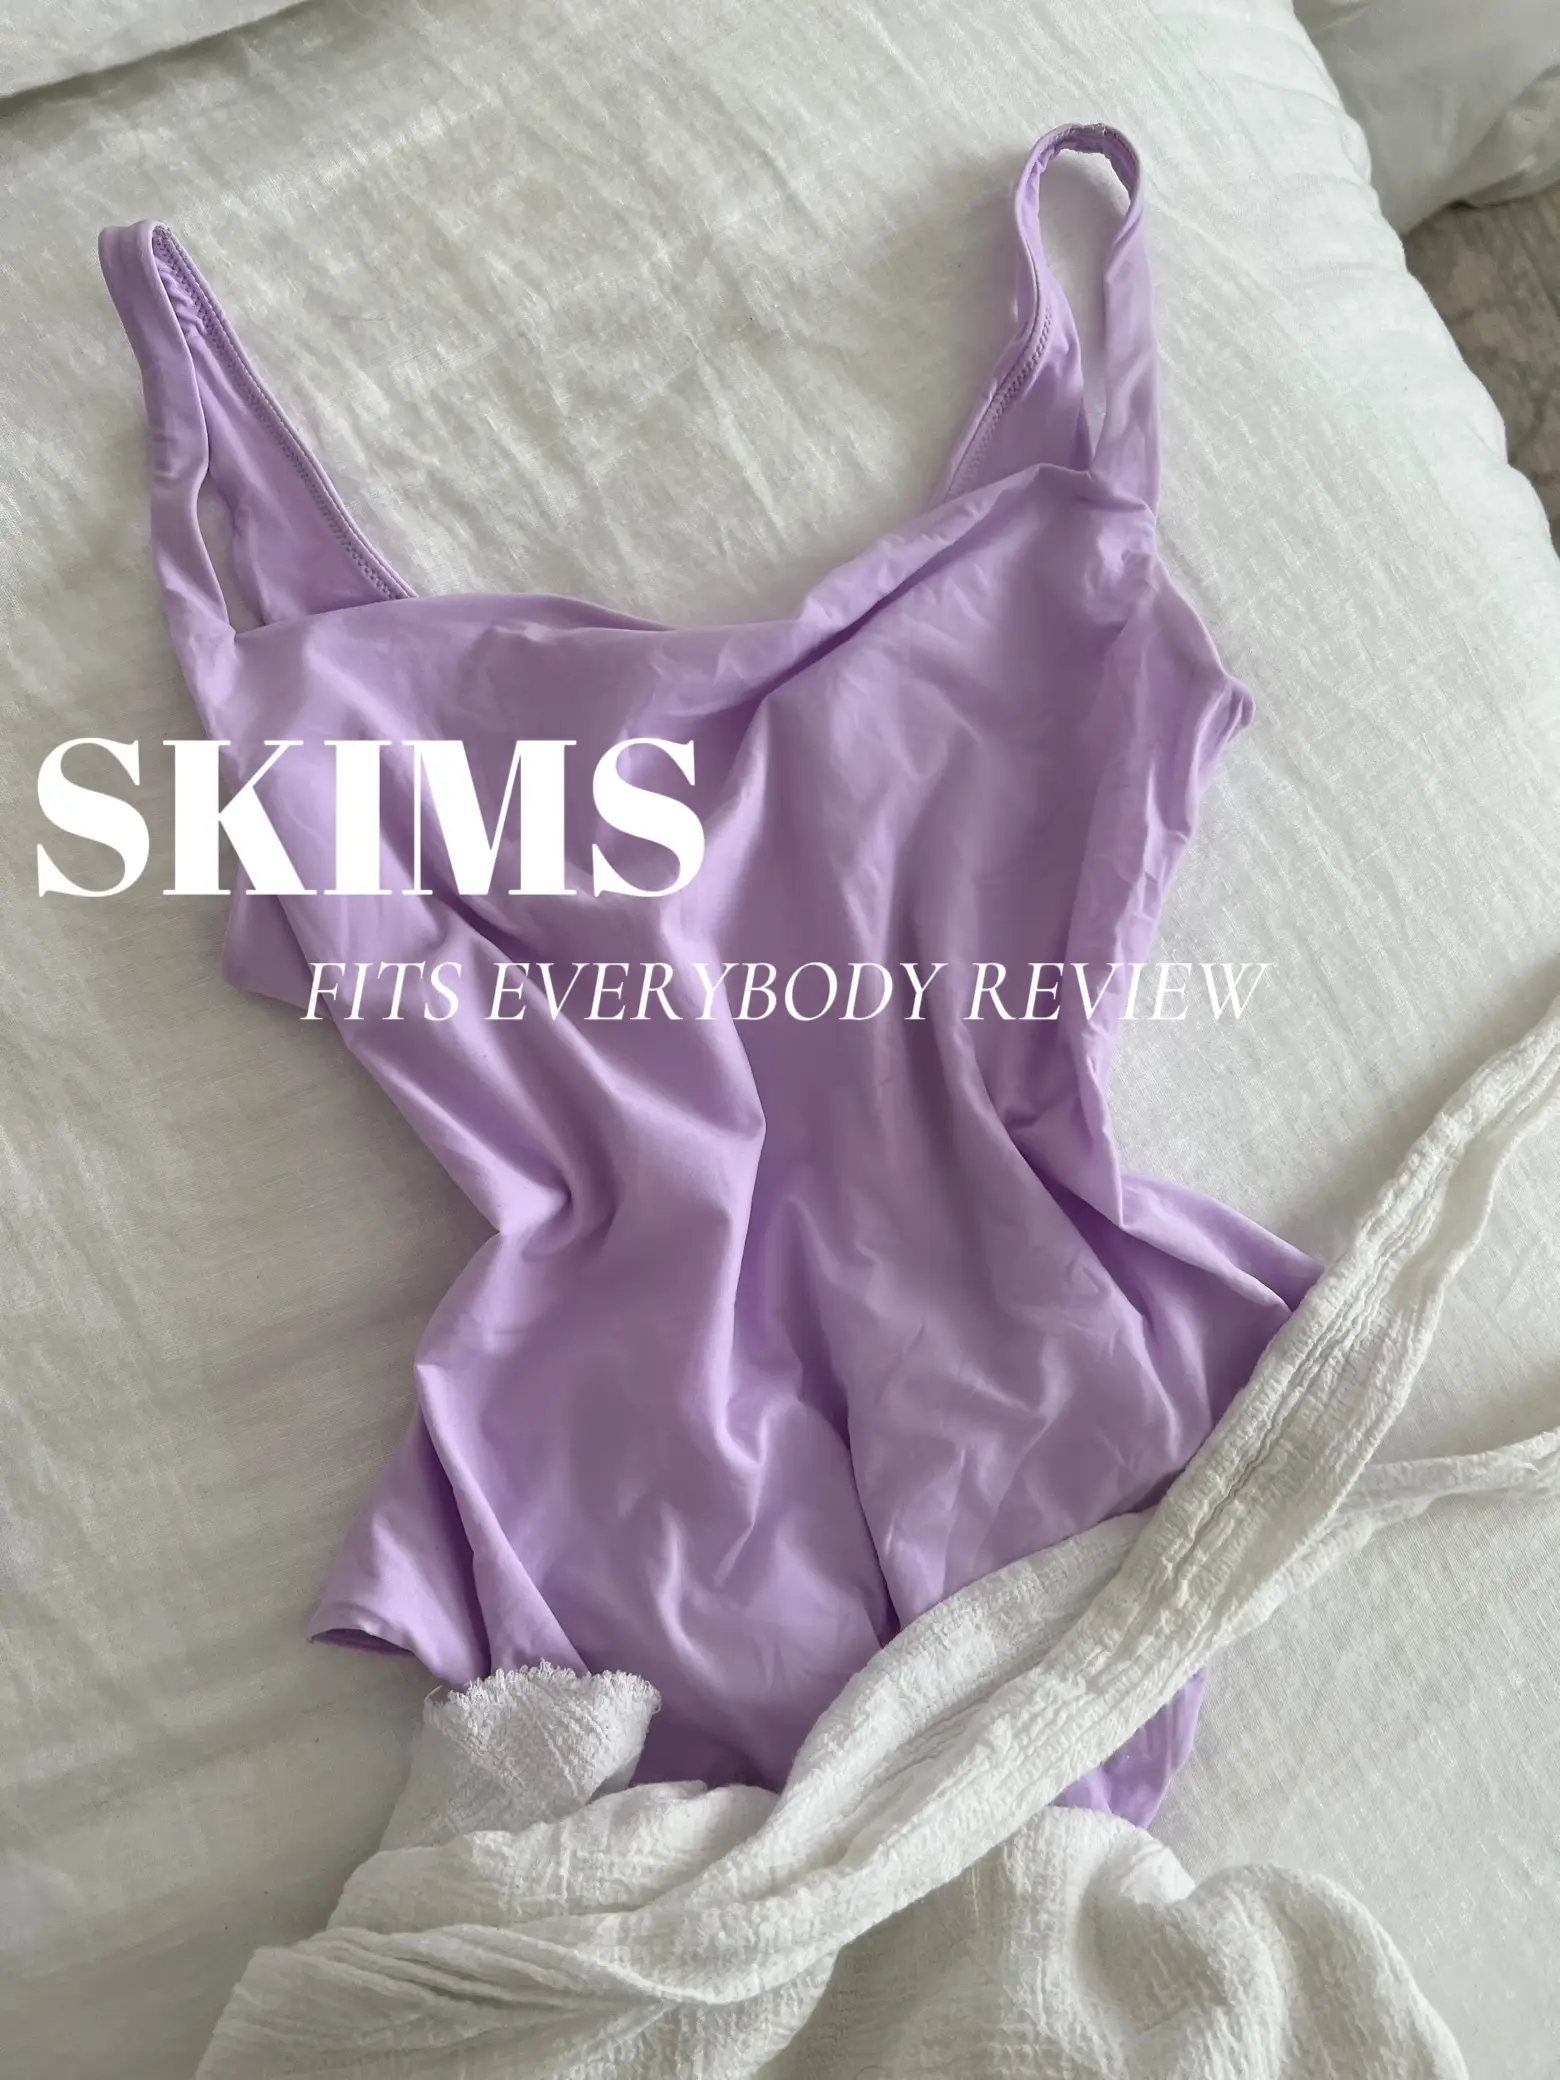 SKIMS fits everybody review, Gallery posted by nataliebrekka